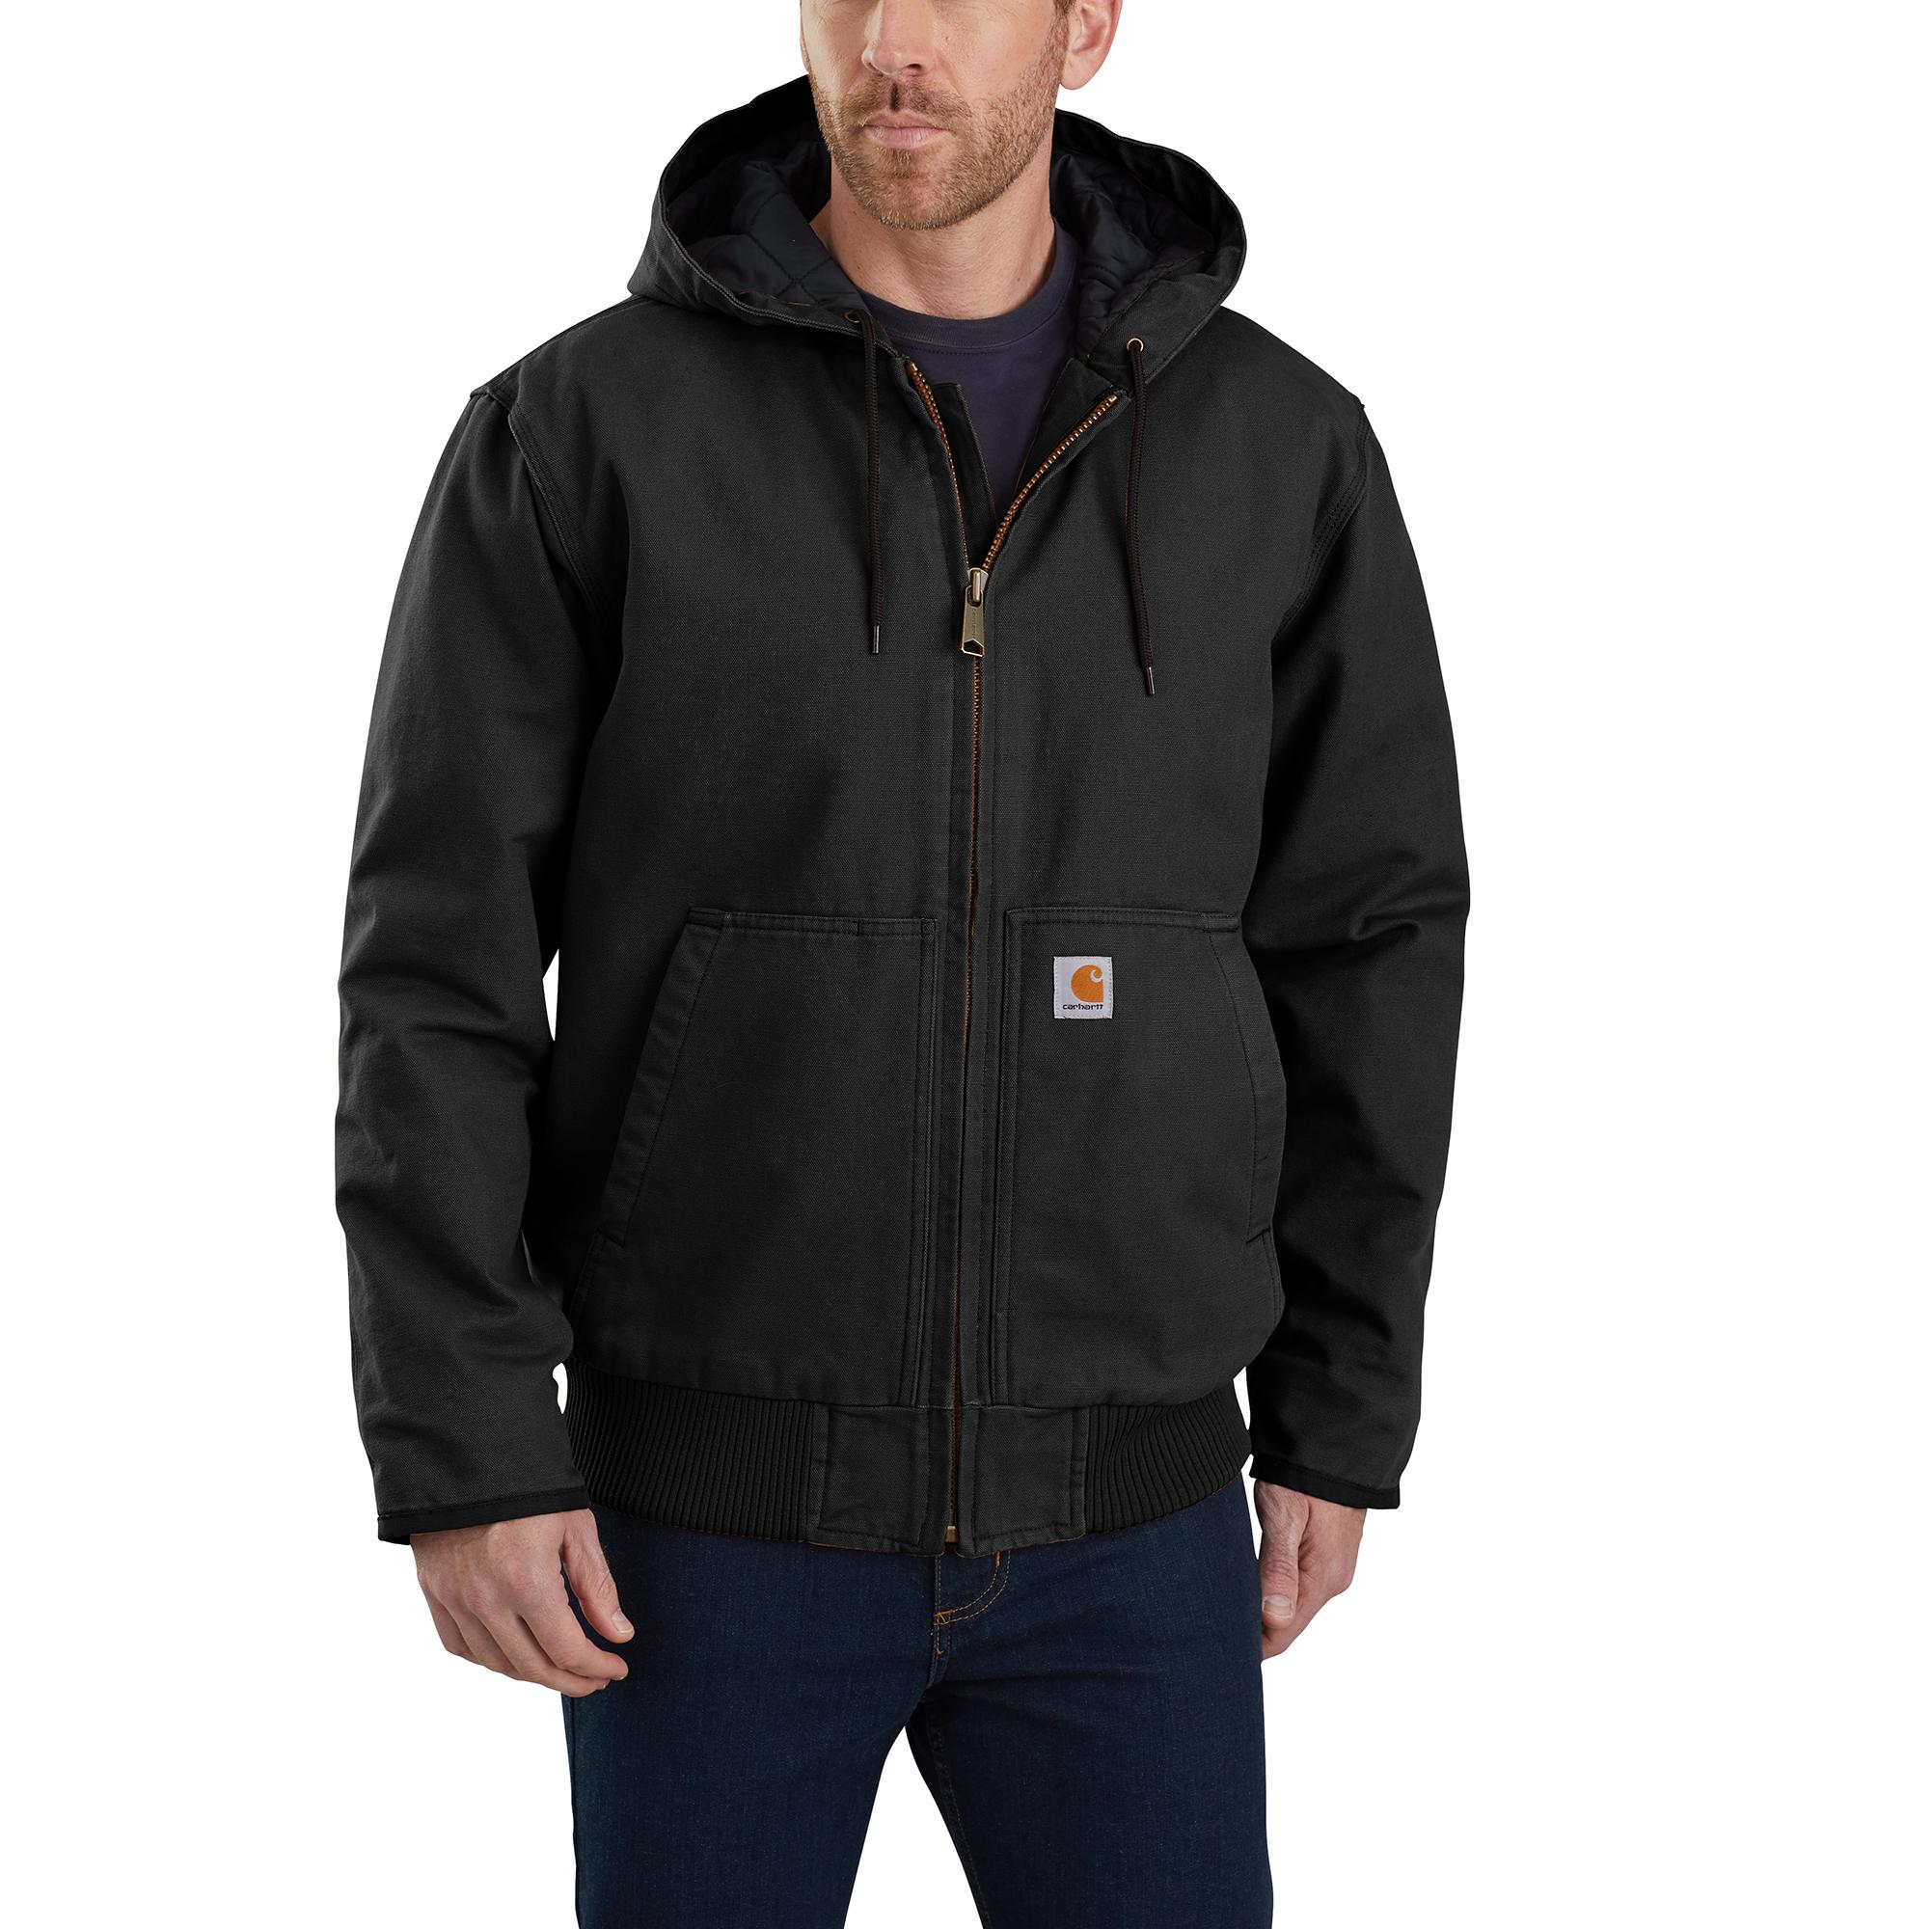 MENS BLACK CHESTER SOLID TWILL CHORE JACKET